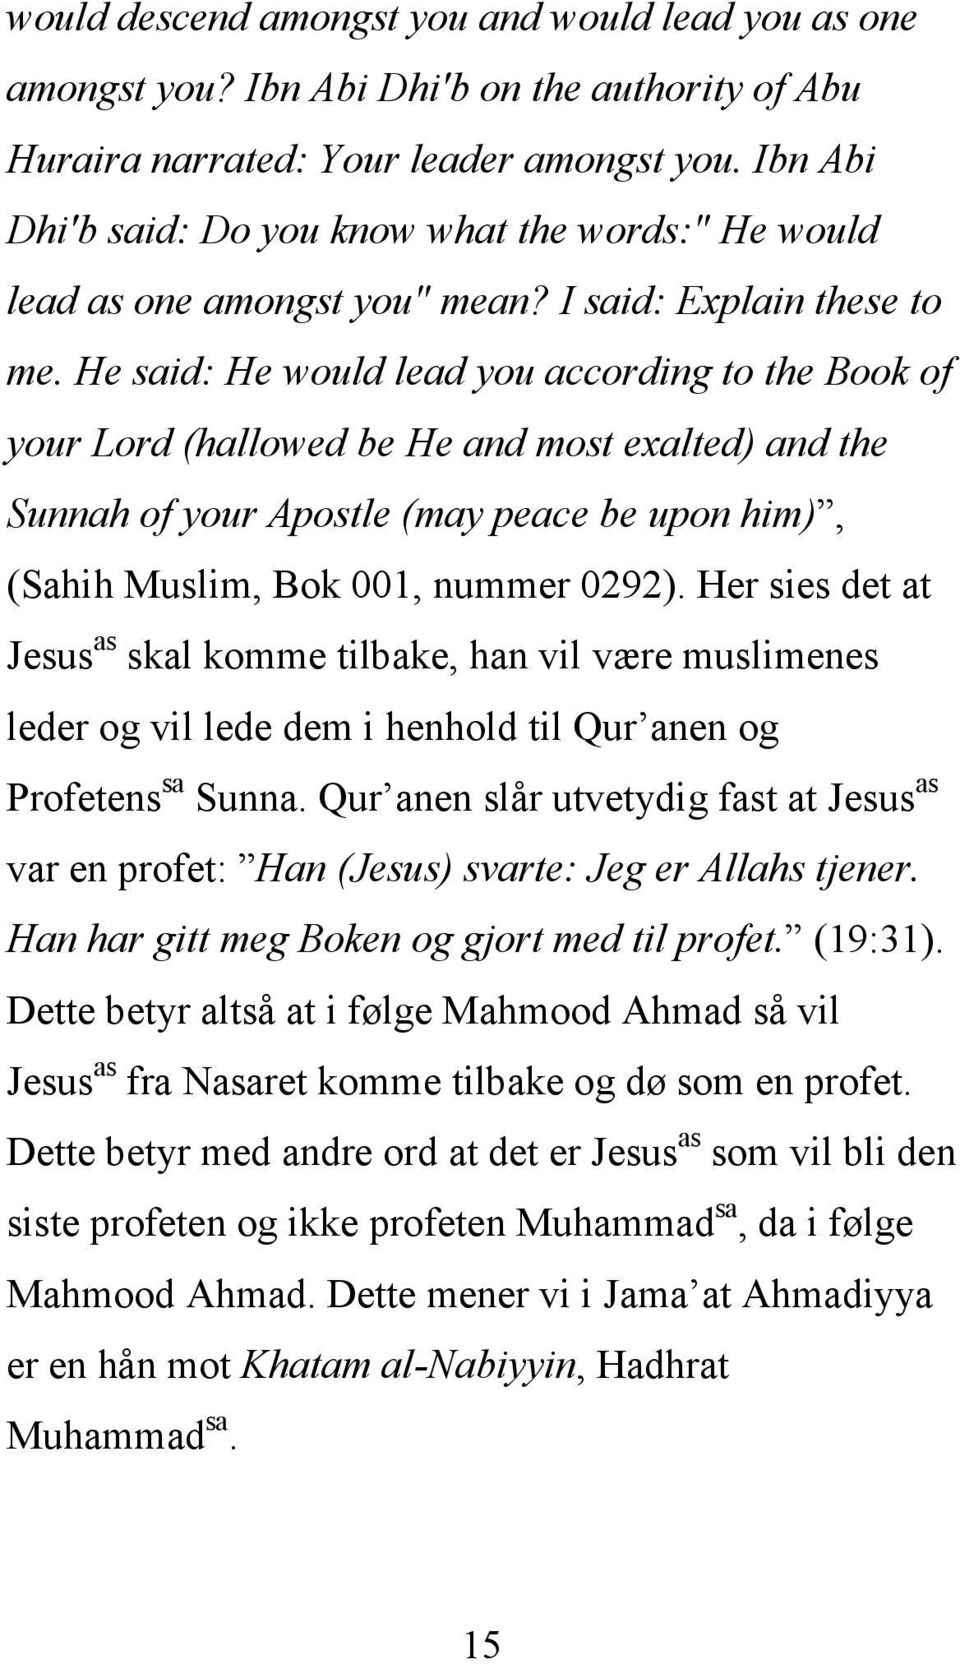 He said: He would lead you according to the Book of your Lord (hallowed be He and most exalted) and the Sunnah of your Apostle (may peace be upon him), (Sahih Muslim, Bok 001, nummer 0292).